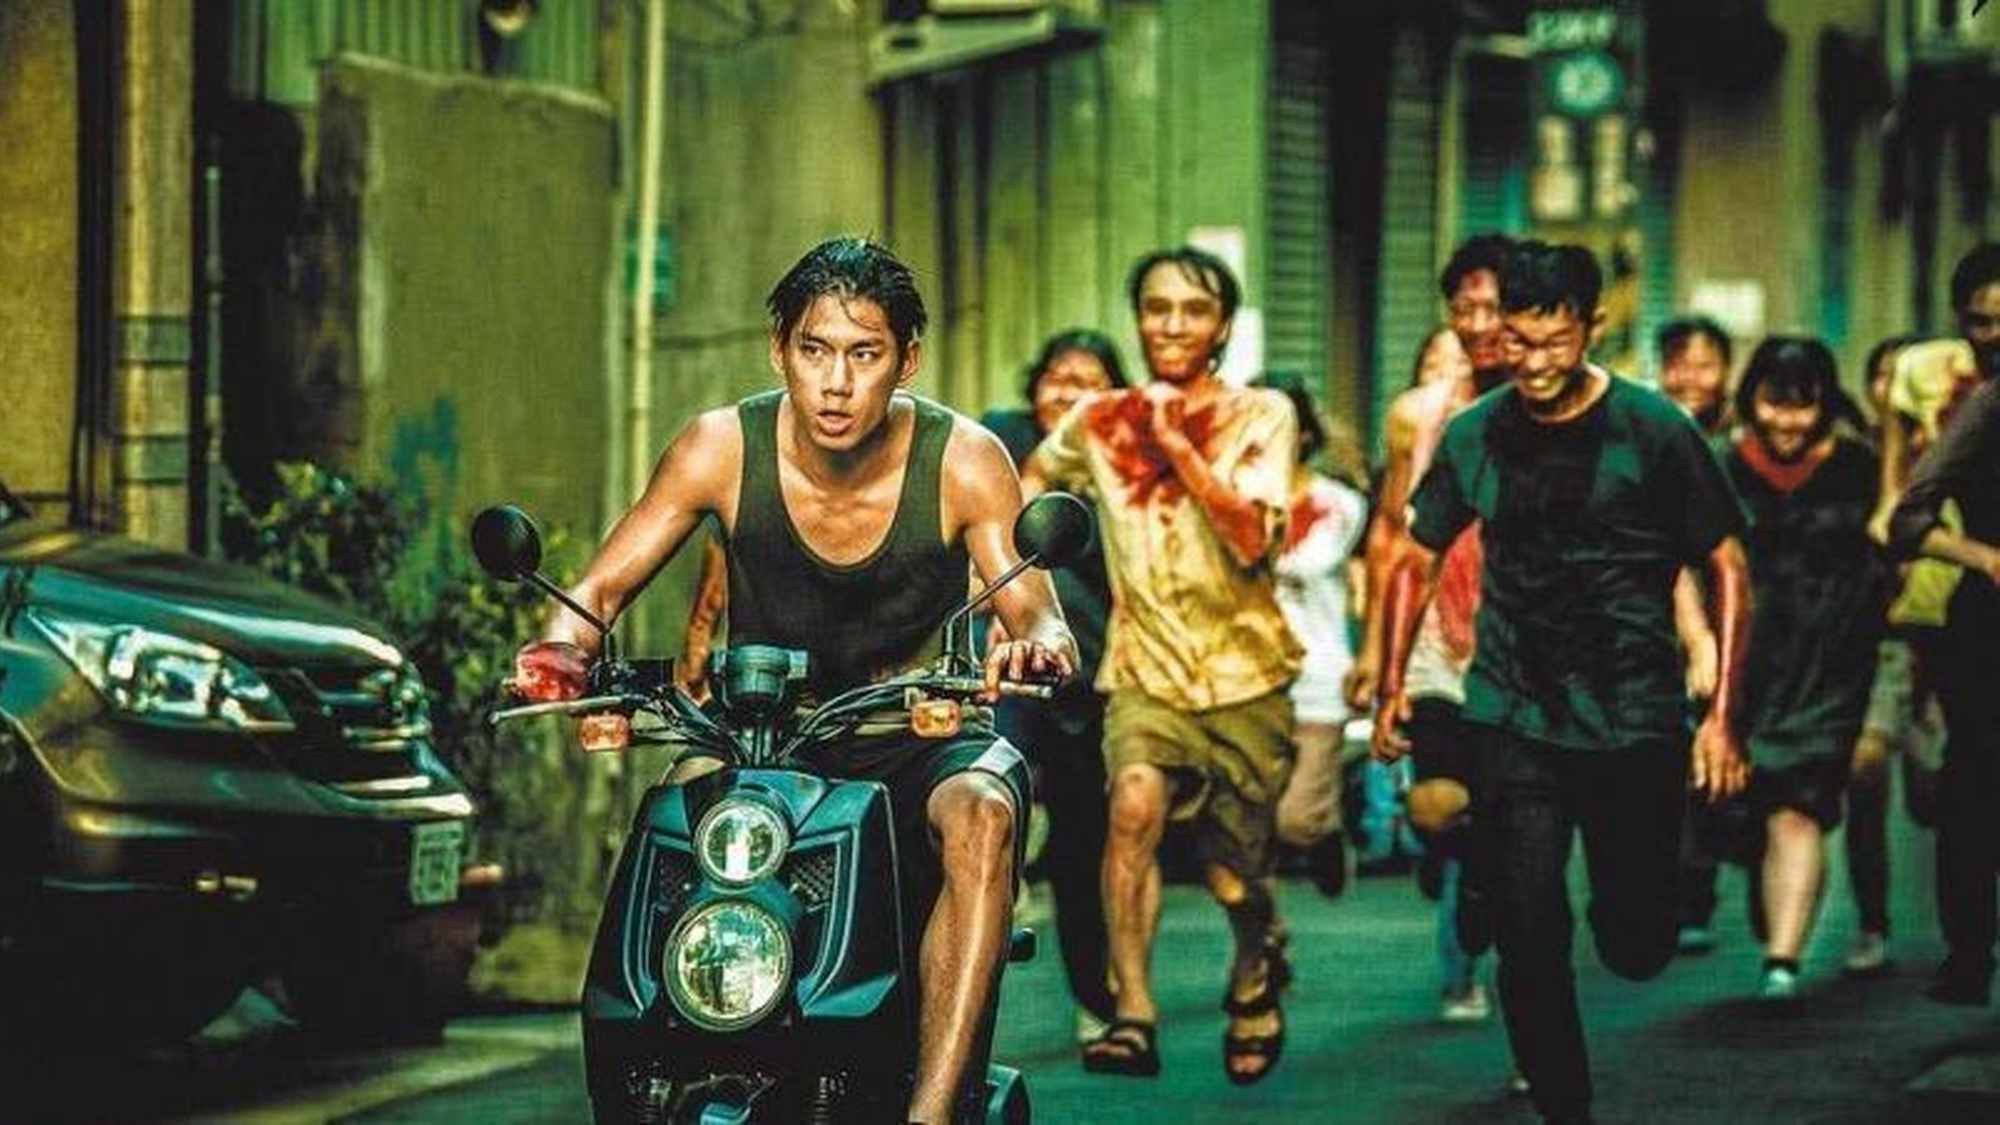 Jim on a moped being chased by the infected